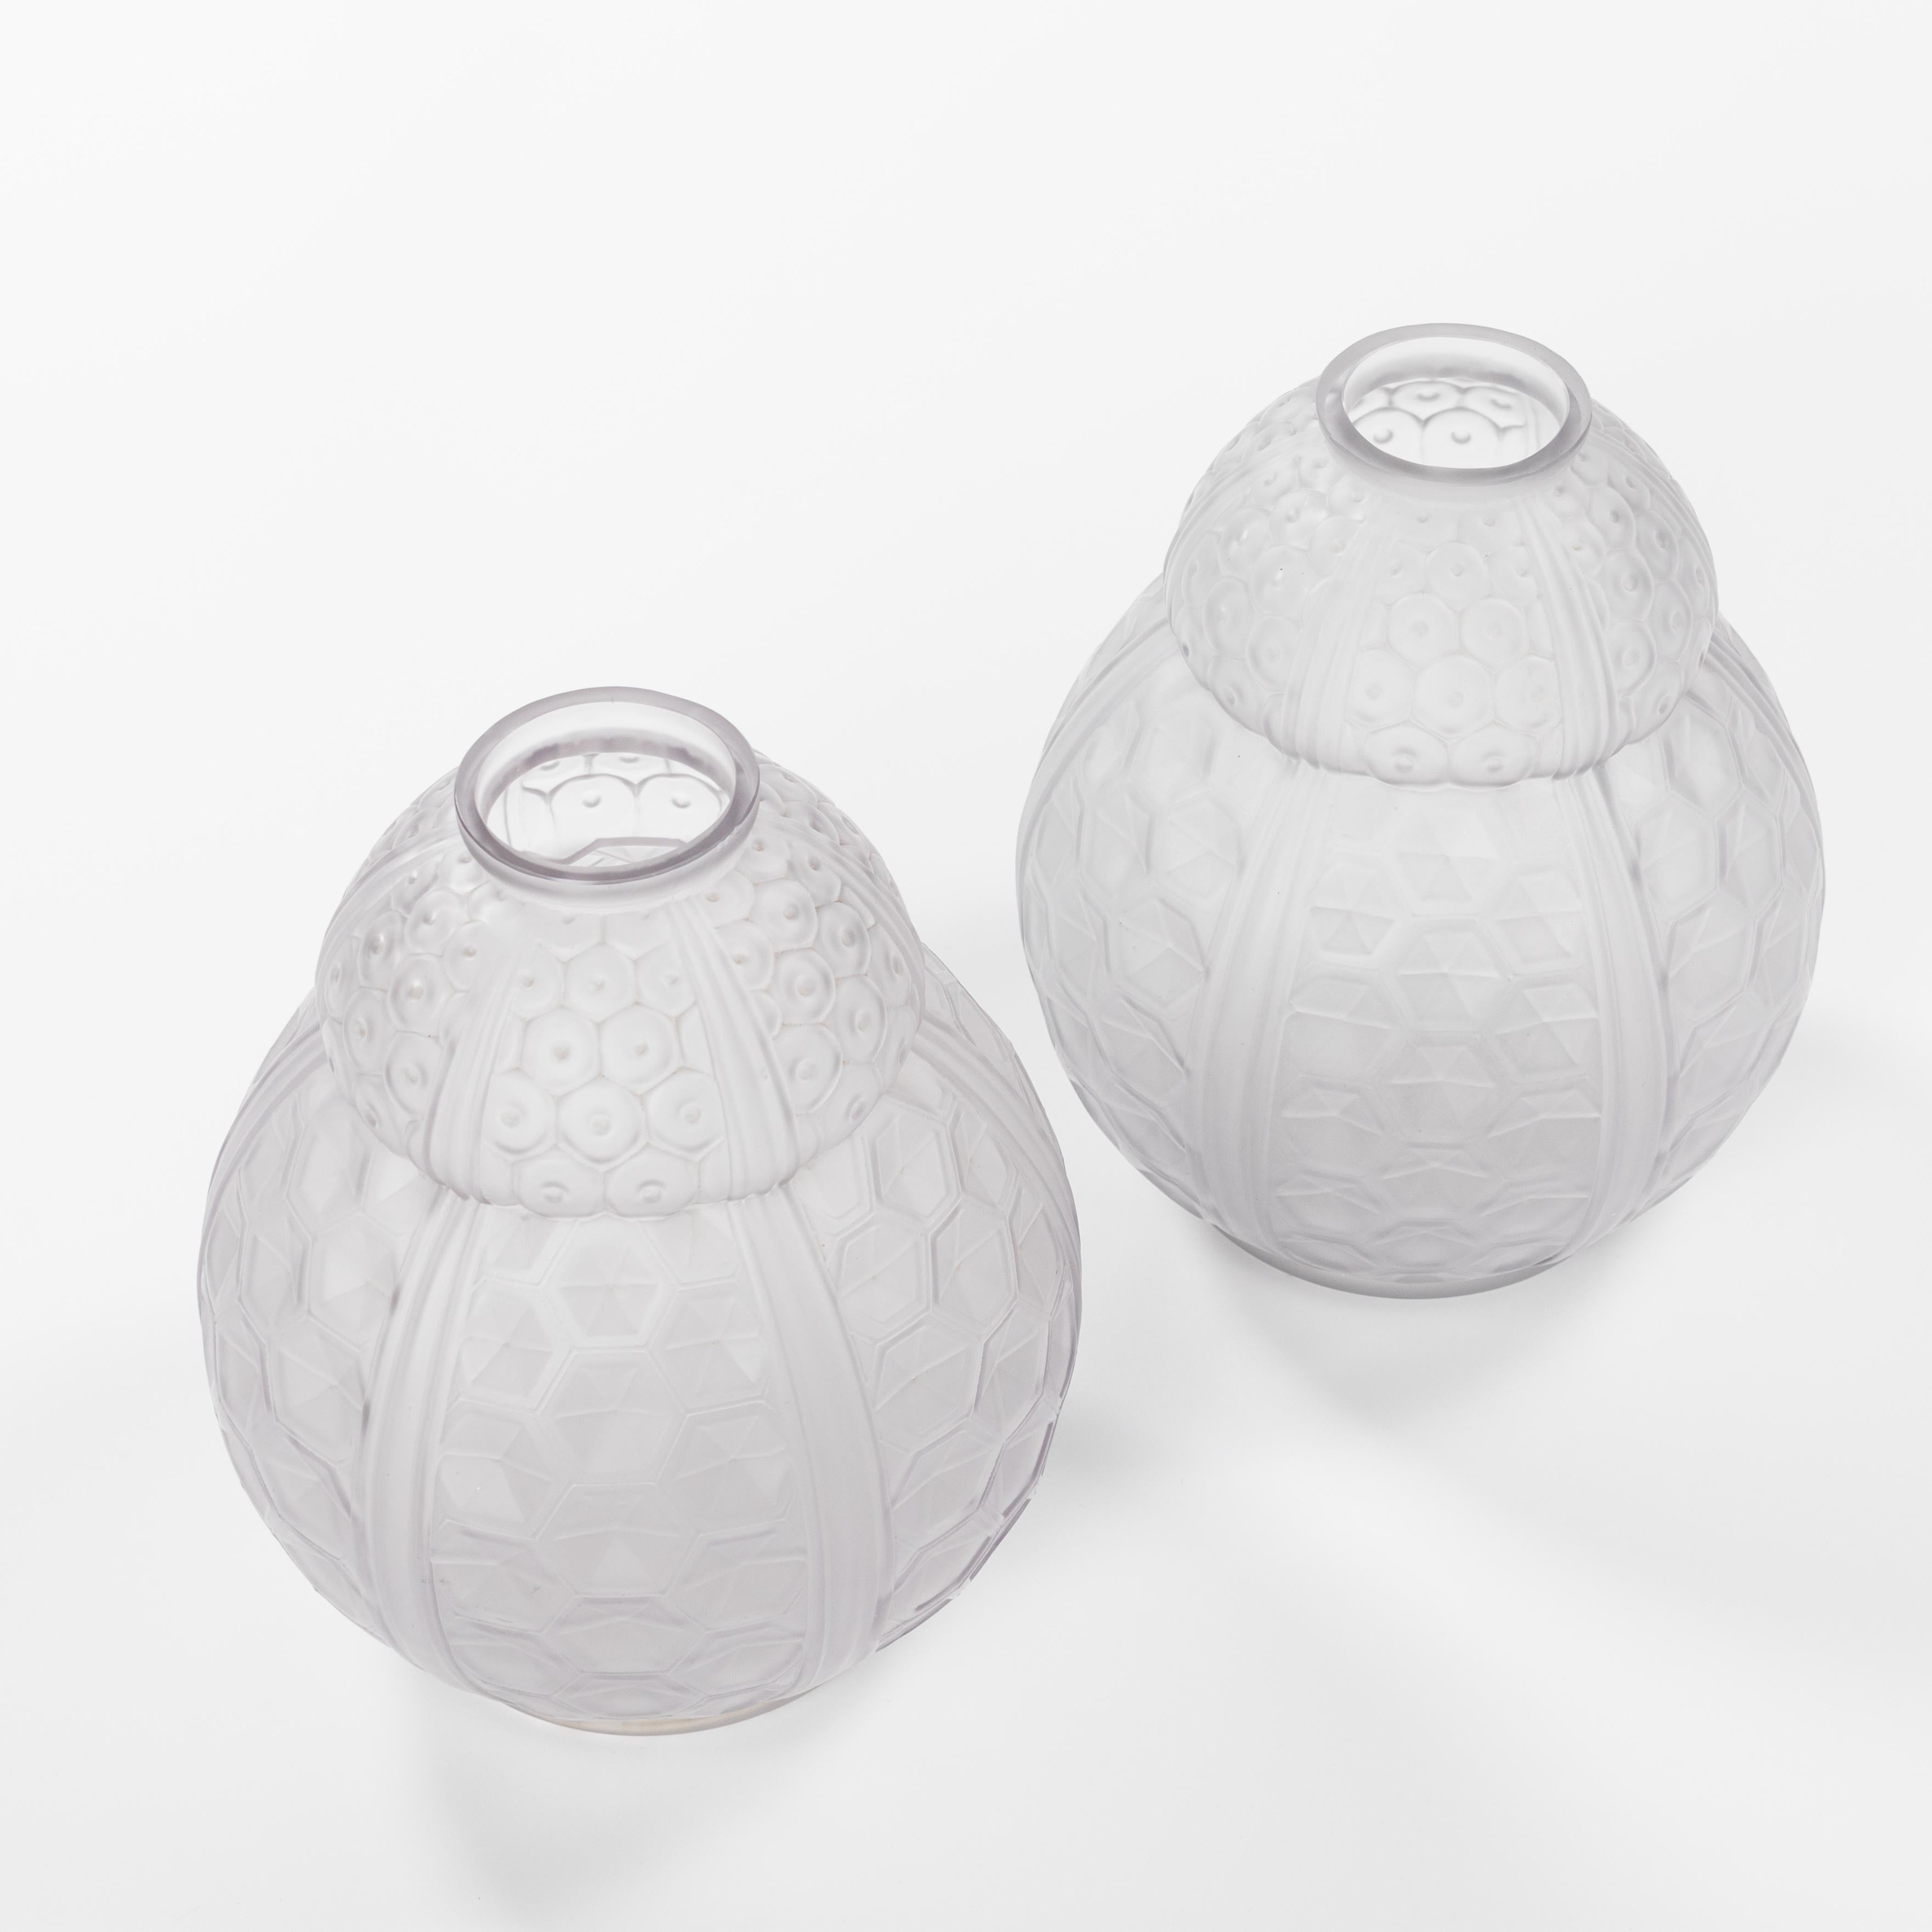 Pressed Pair of French Art Déco Art-Glass Vases in Geometric Design by Oreor, 1930s For Sale